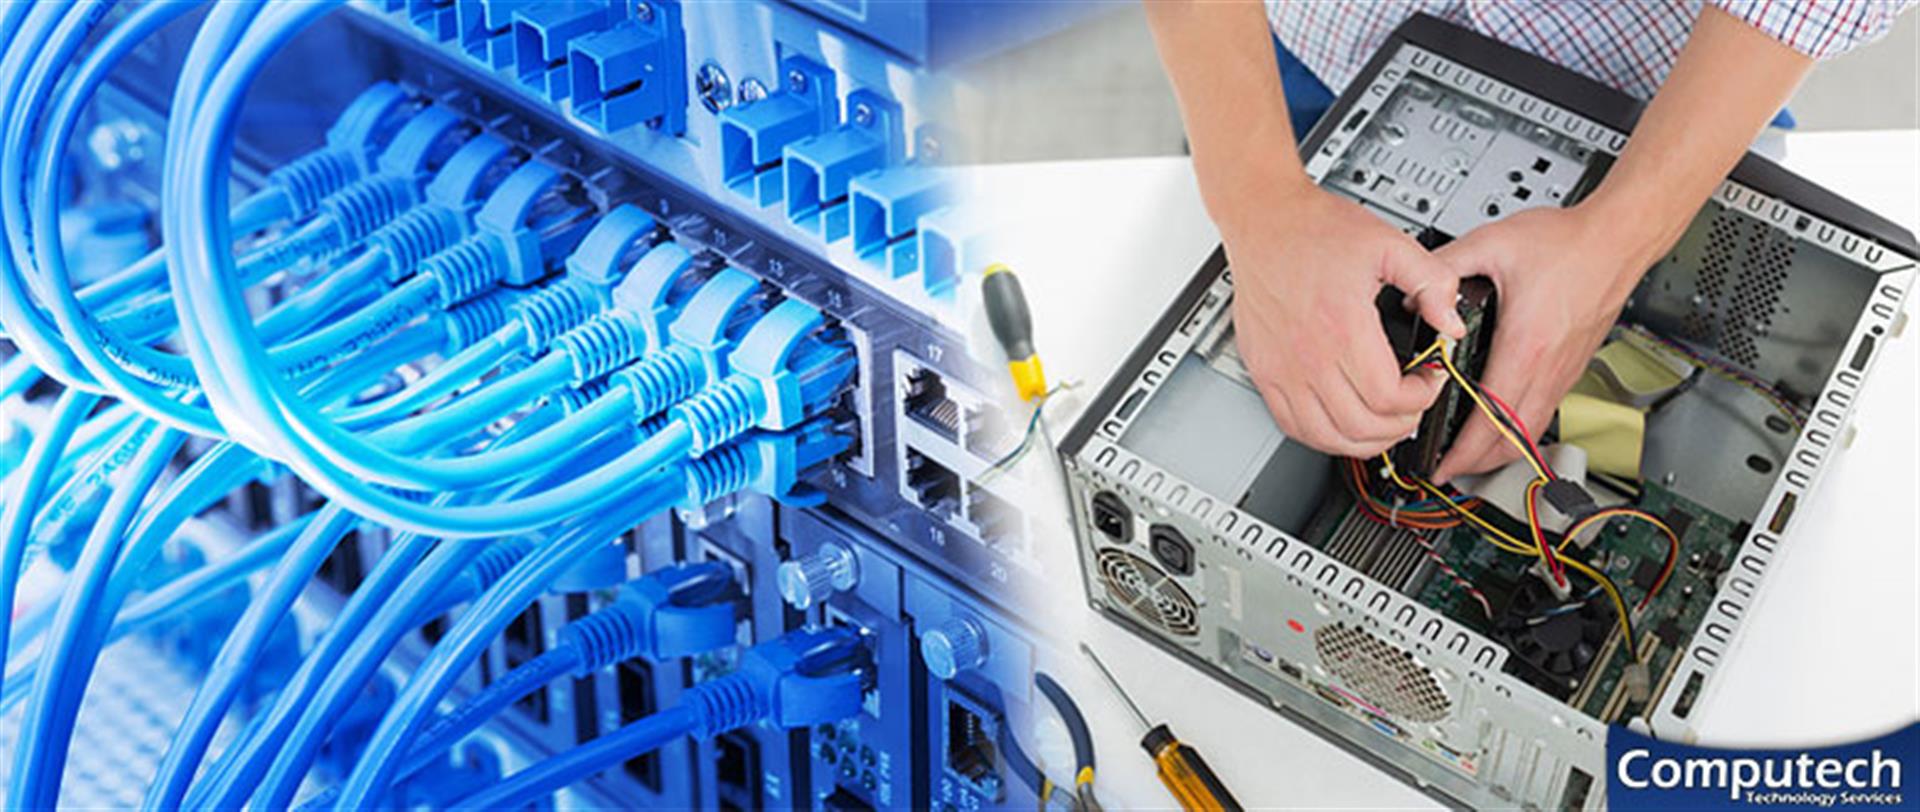 Perry Georgia On Site PC & Printer Repairs, Networks, Voice & Data Cabling Services